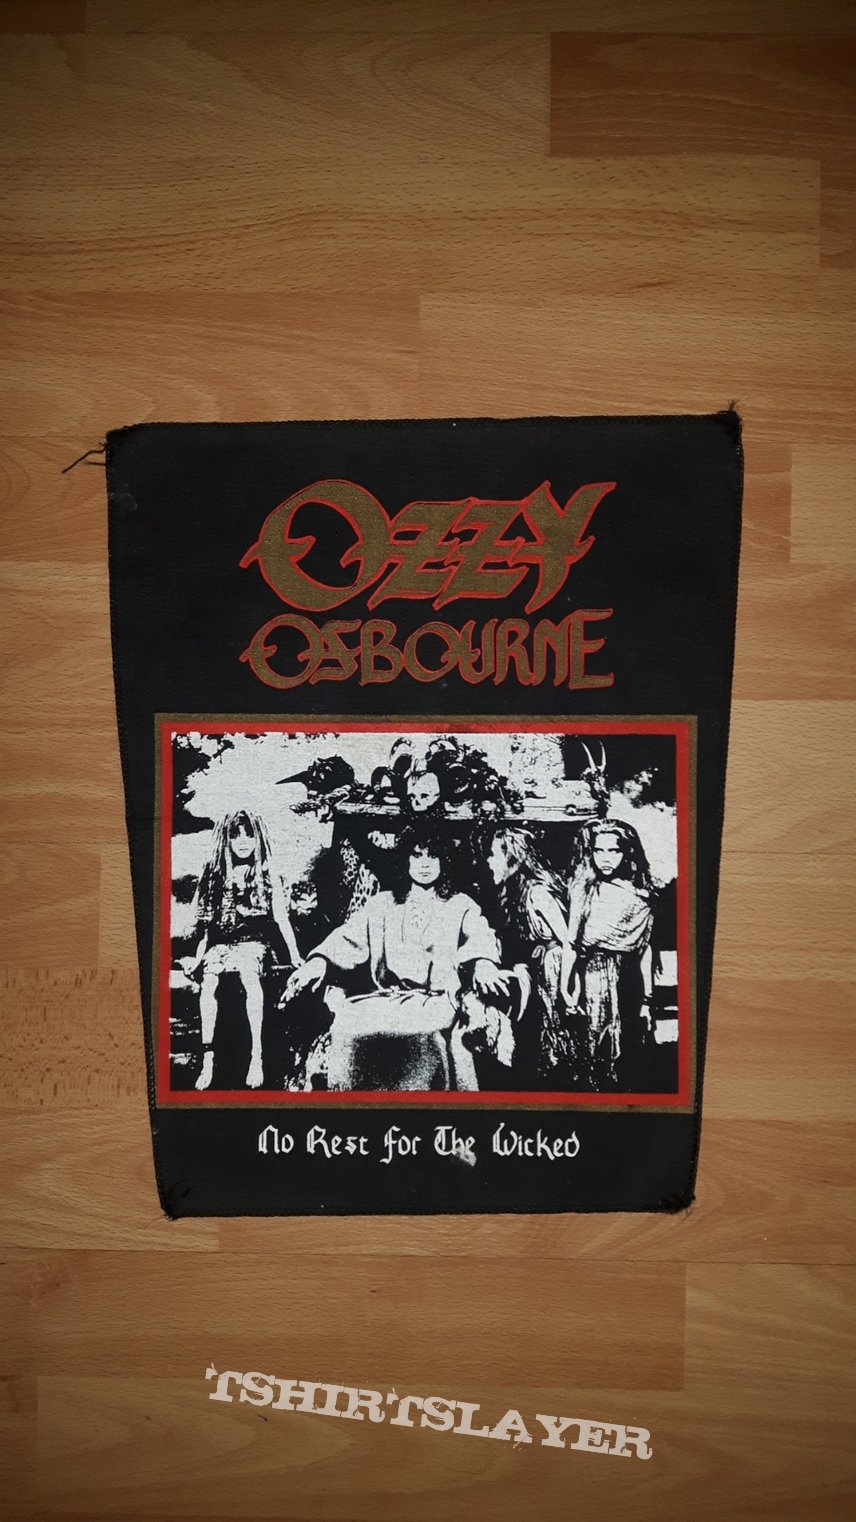 My Ozzy Battle Vest and my Ozzy Osbourne Backpatch Collection